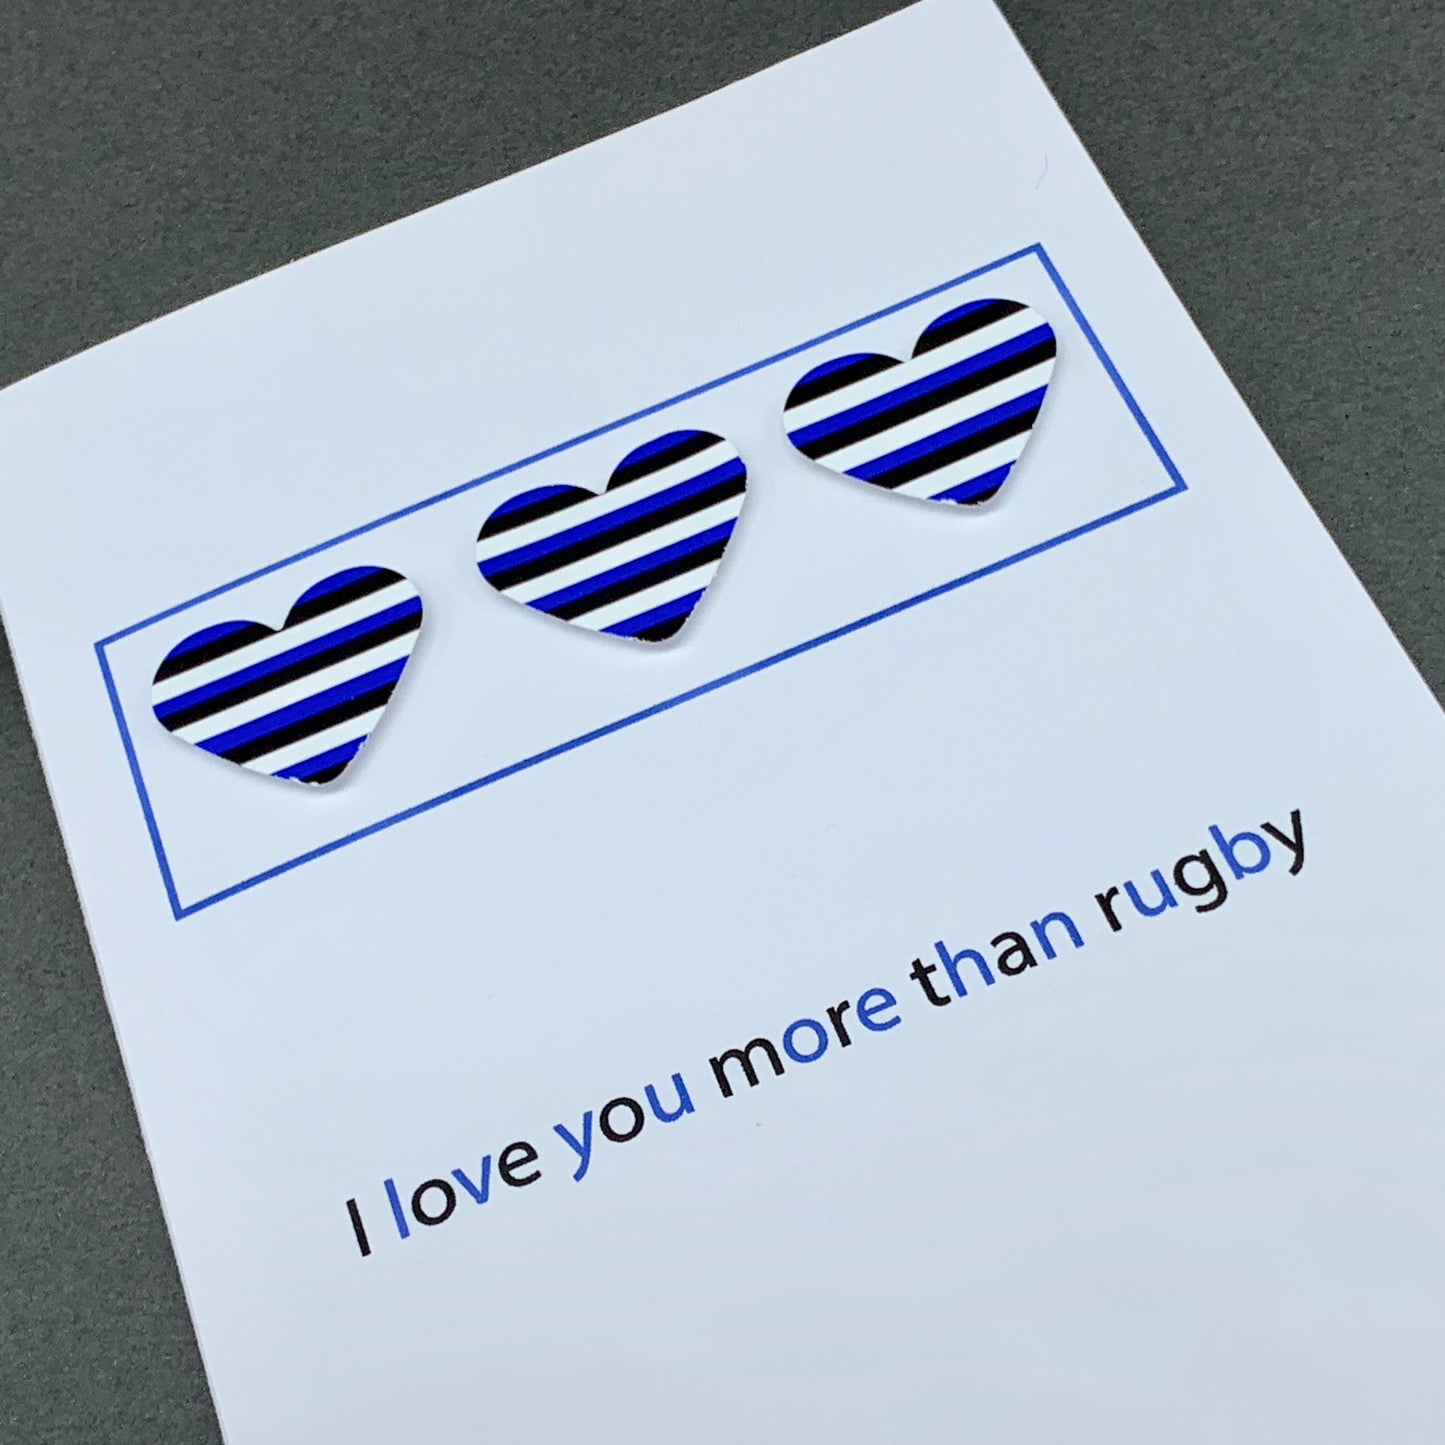 I love you more than rugby